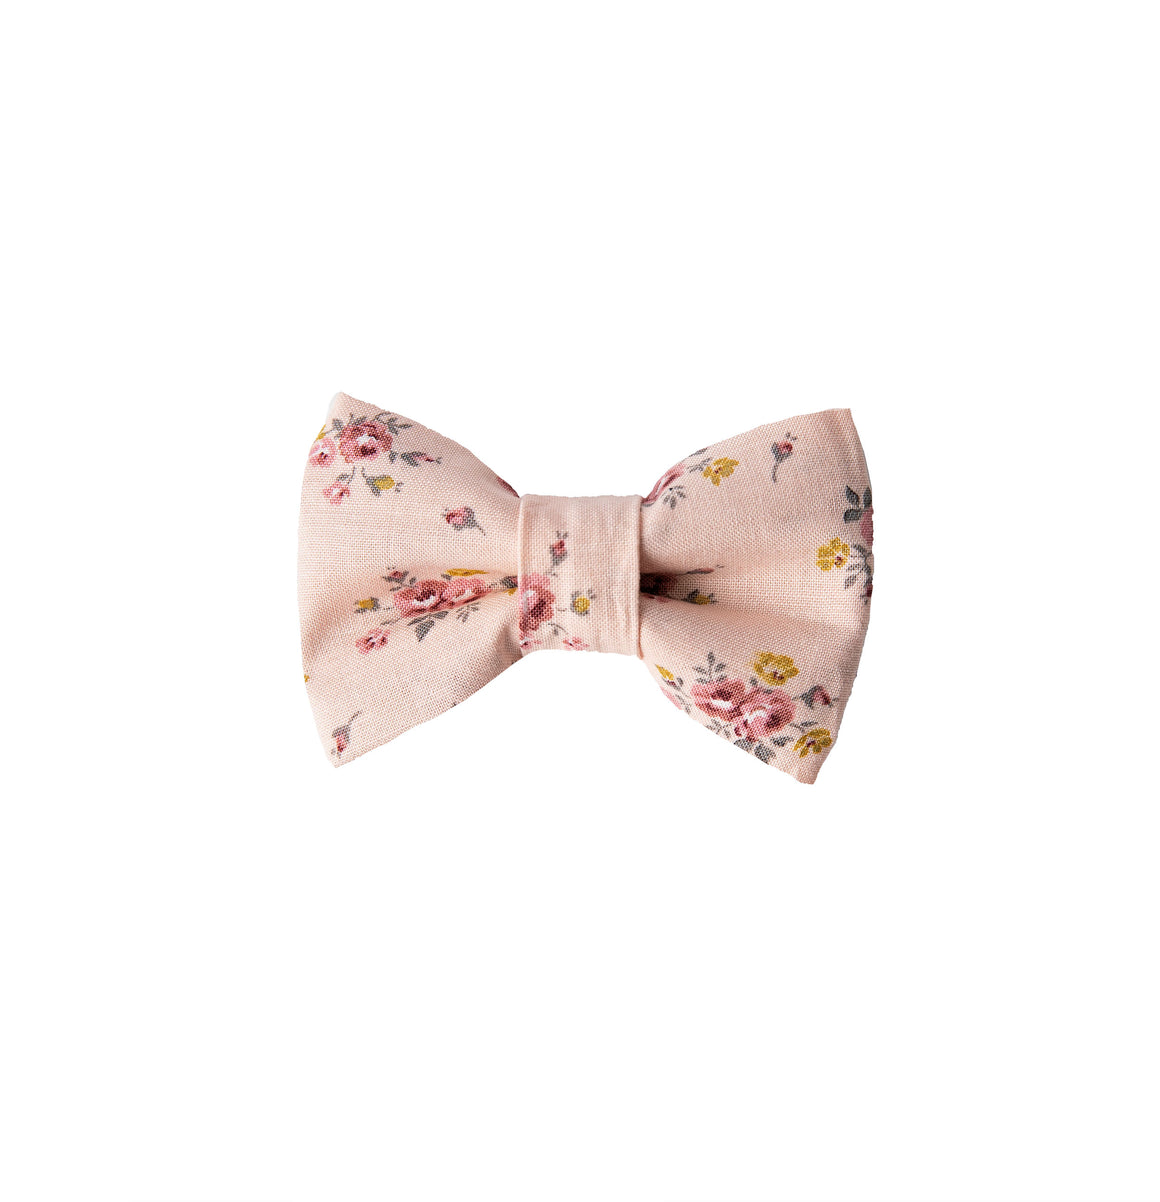 Blush Floral Bow Tie - Boys To Adult Sizes